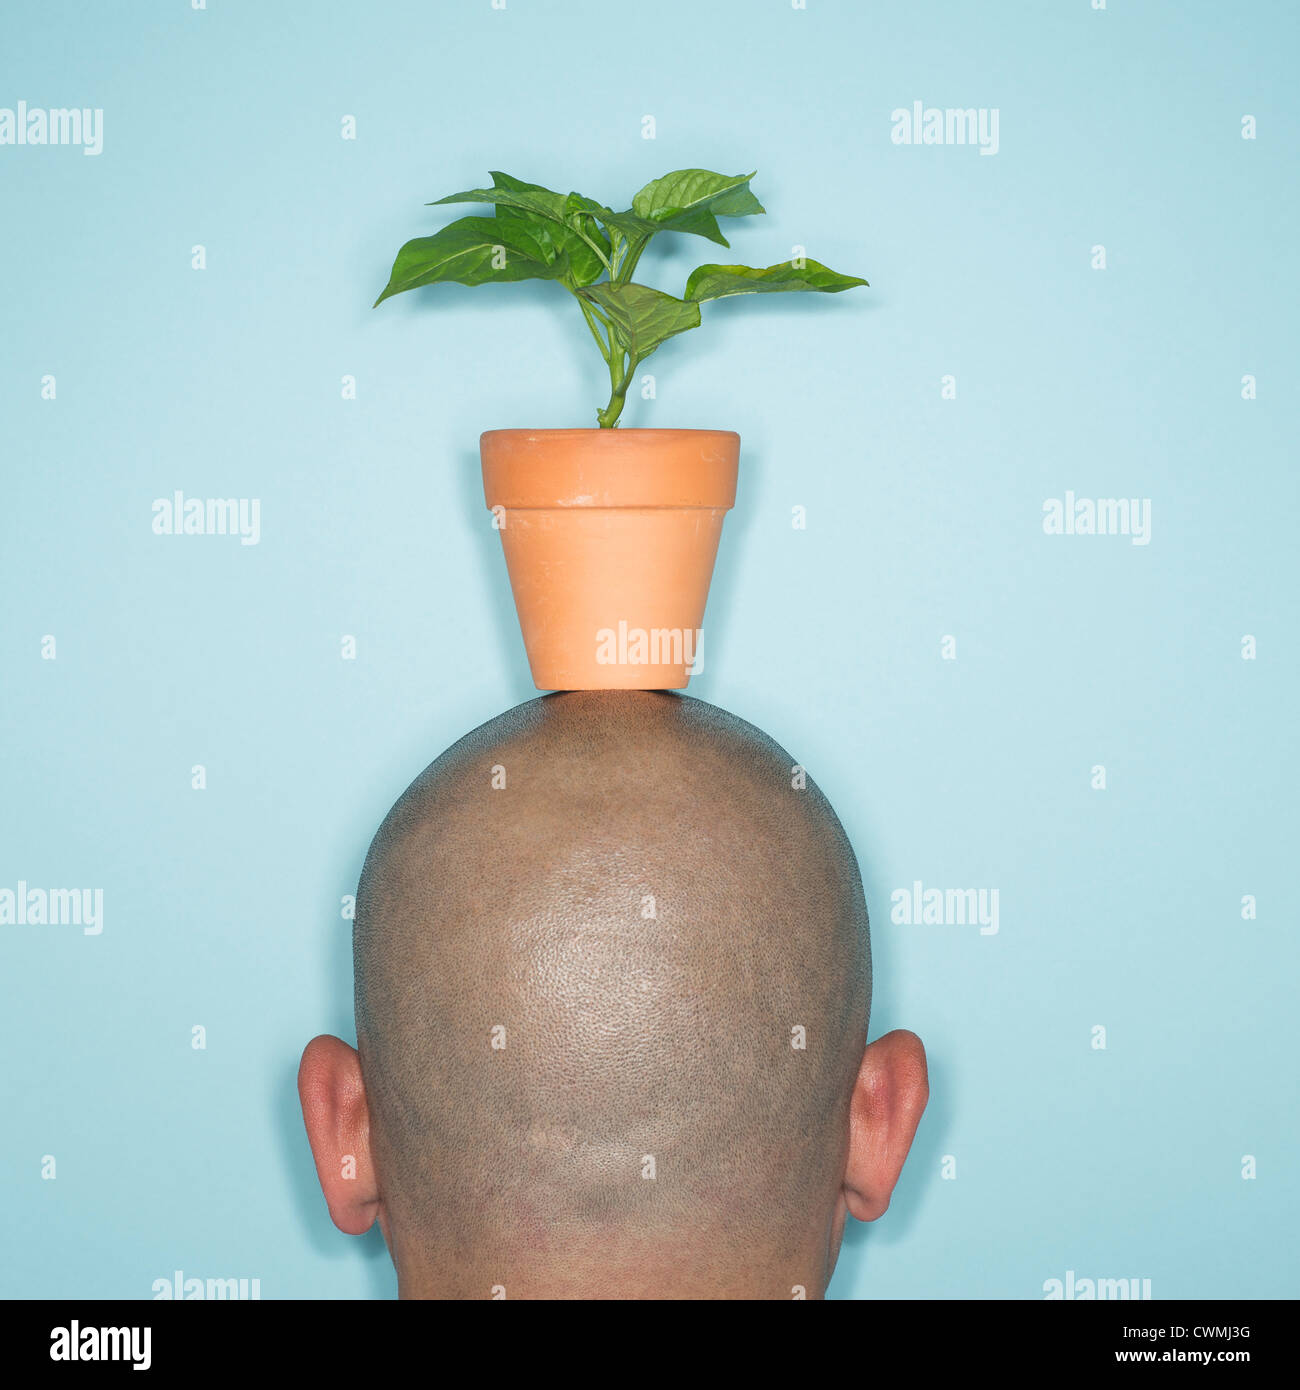 Back view of man with potted plant on head Stock Photo